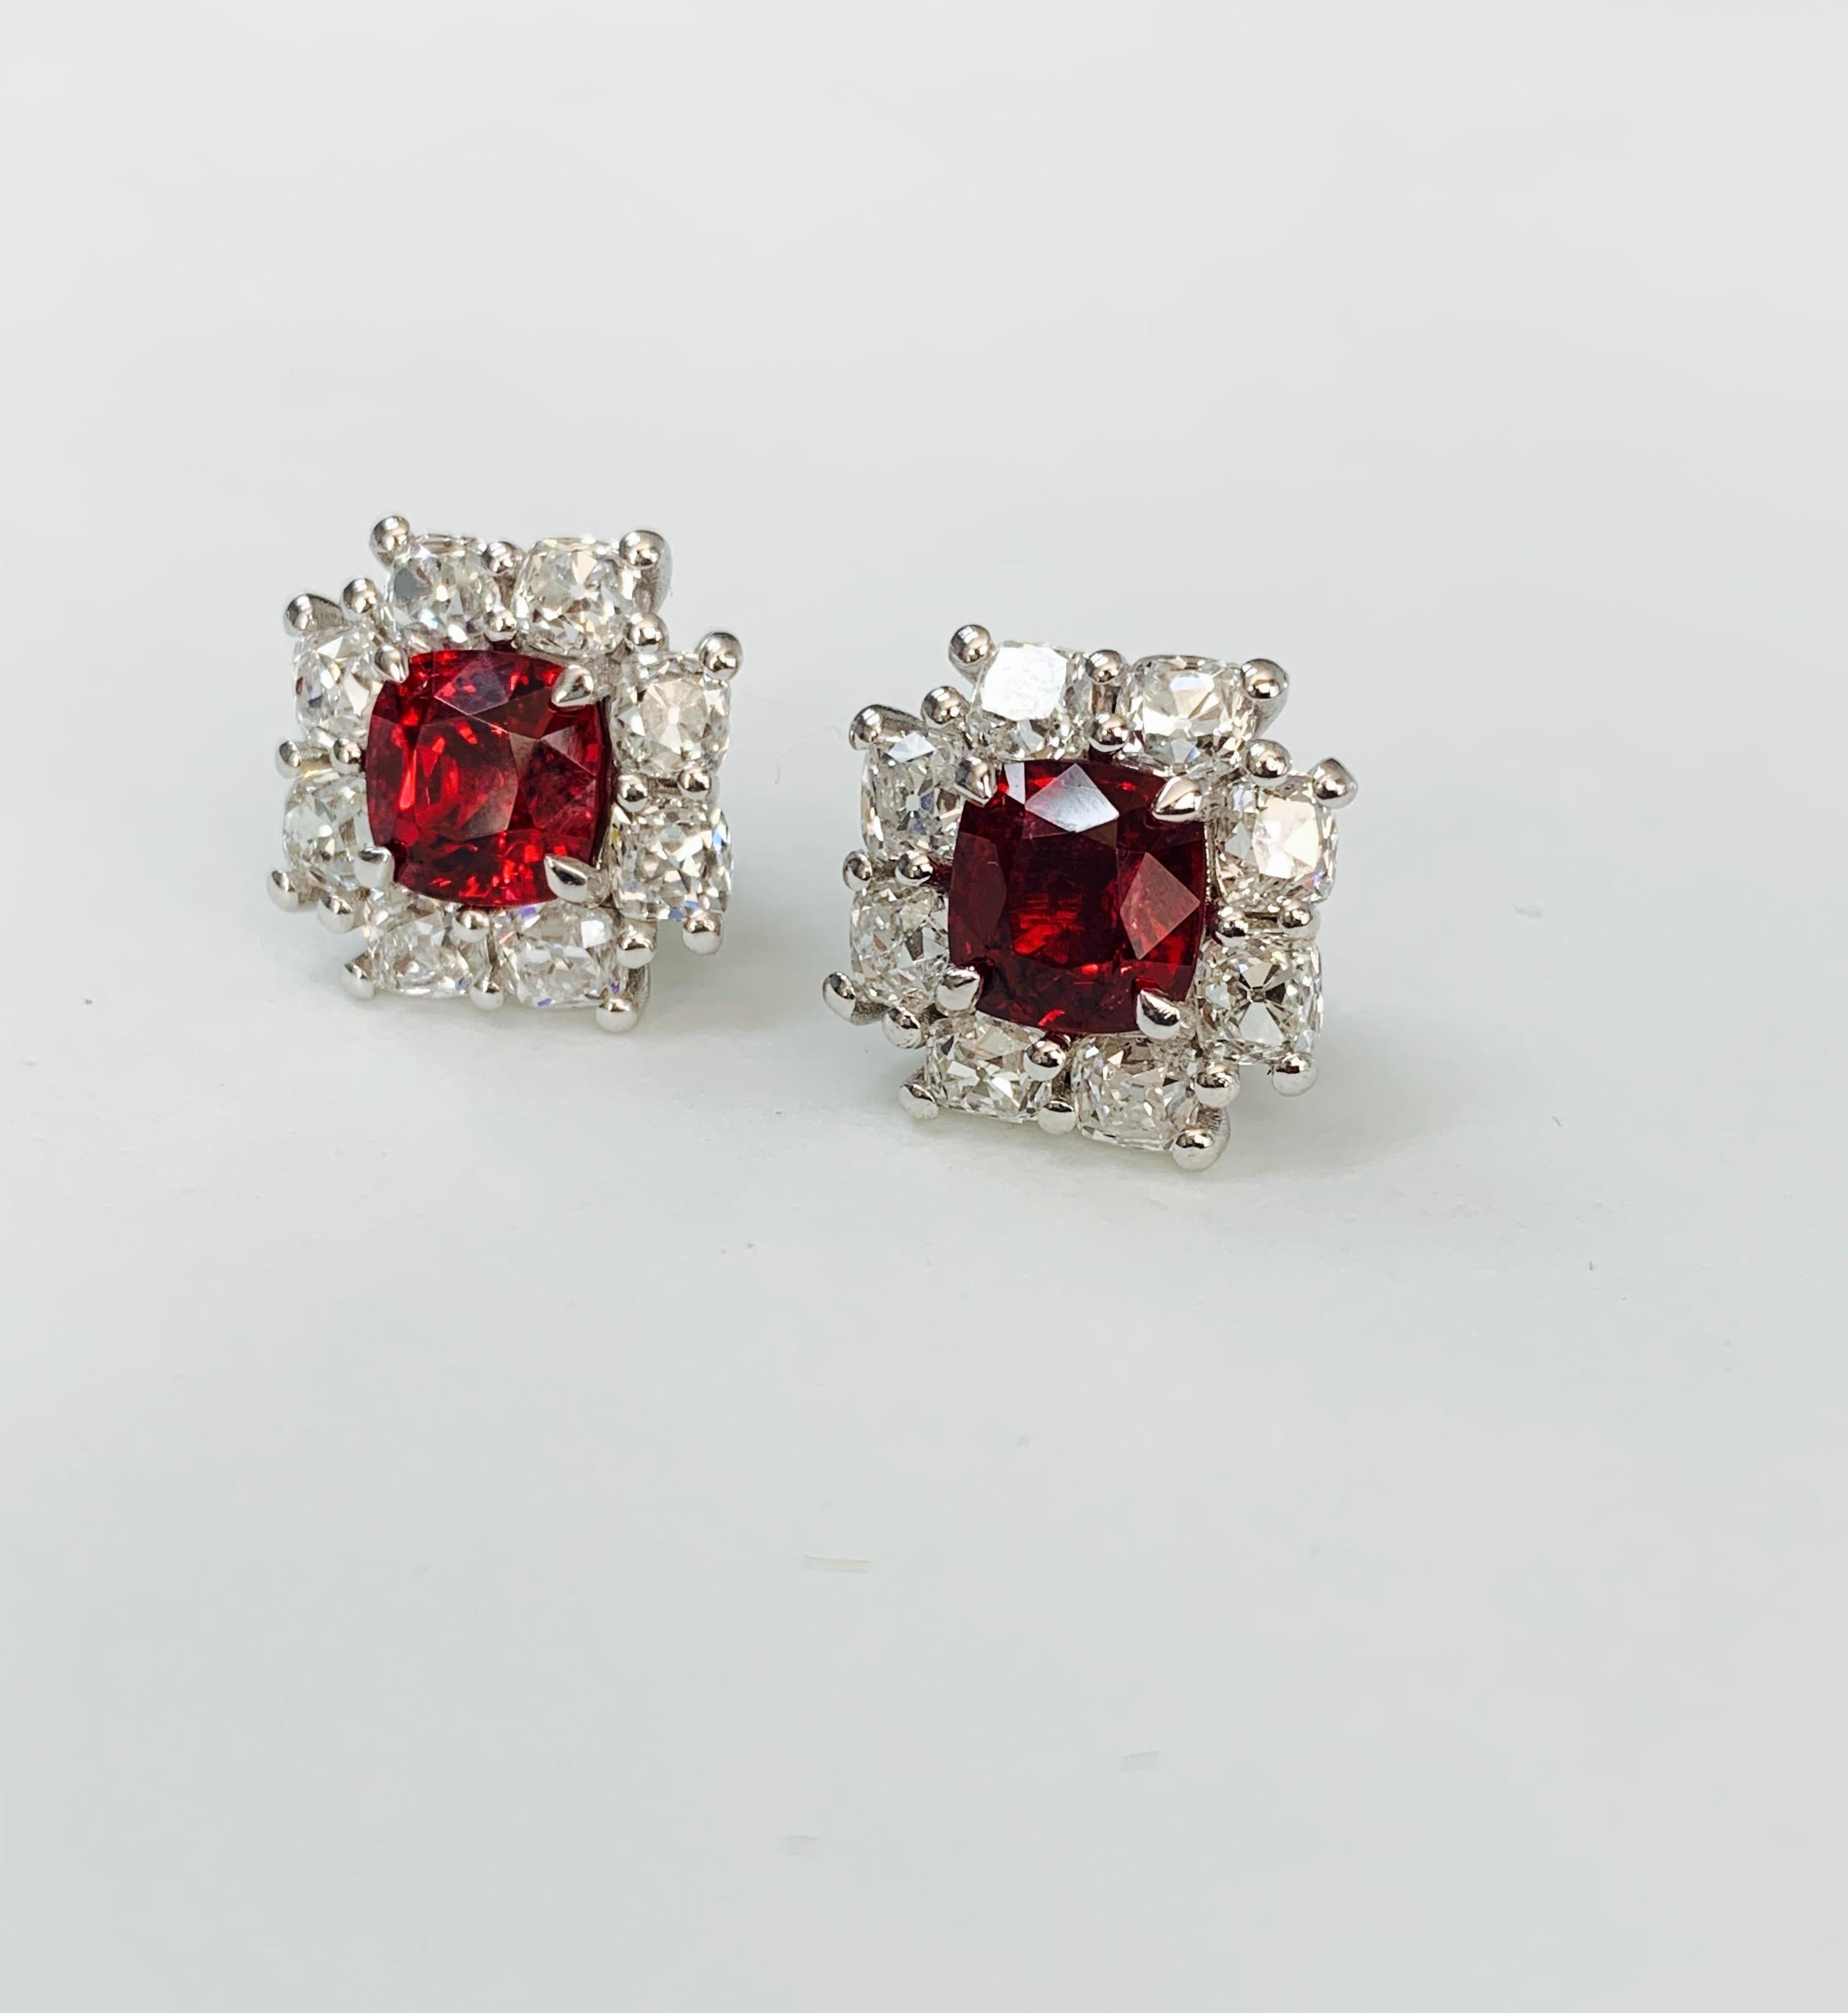 Cushion Cut GIA Certified No Heat Spinel and Diamond Stud Earrings in Platinum